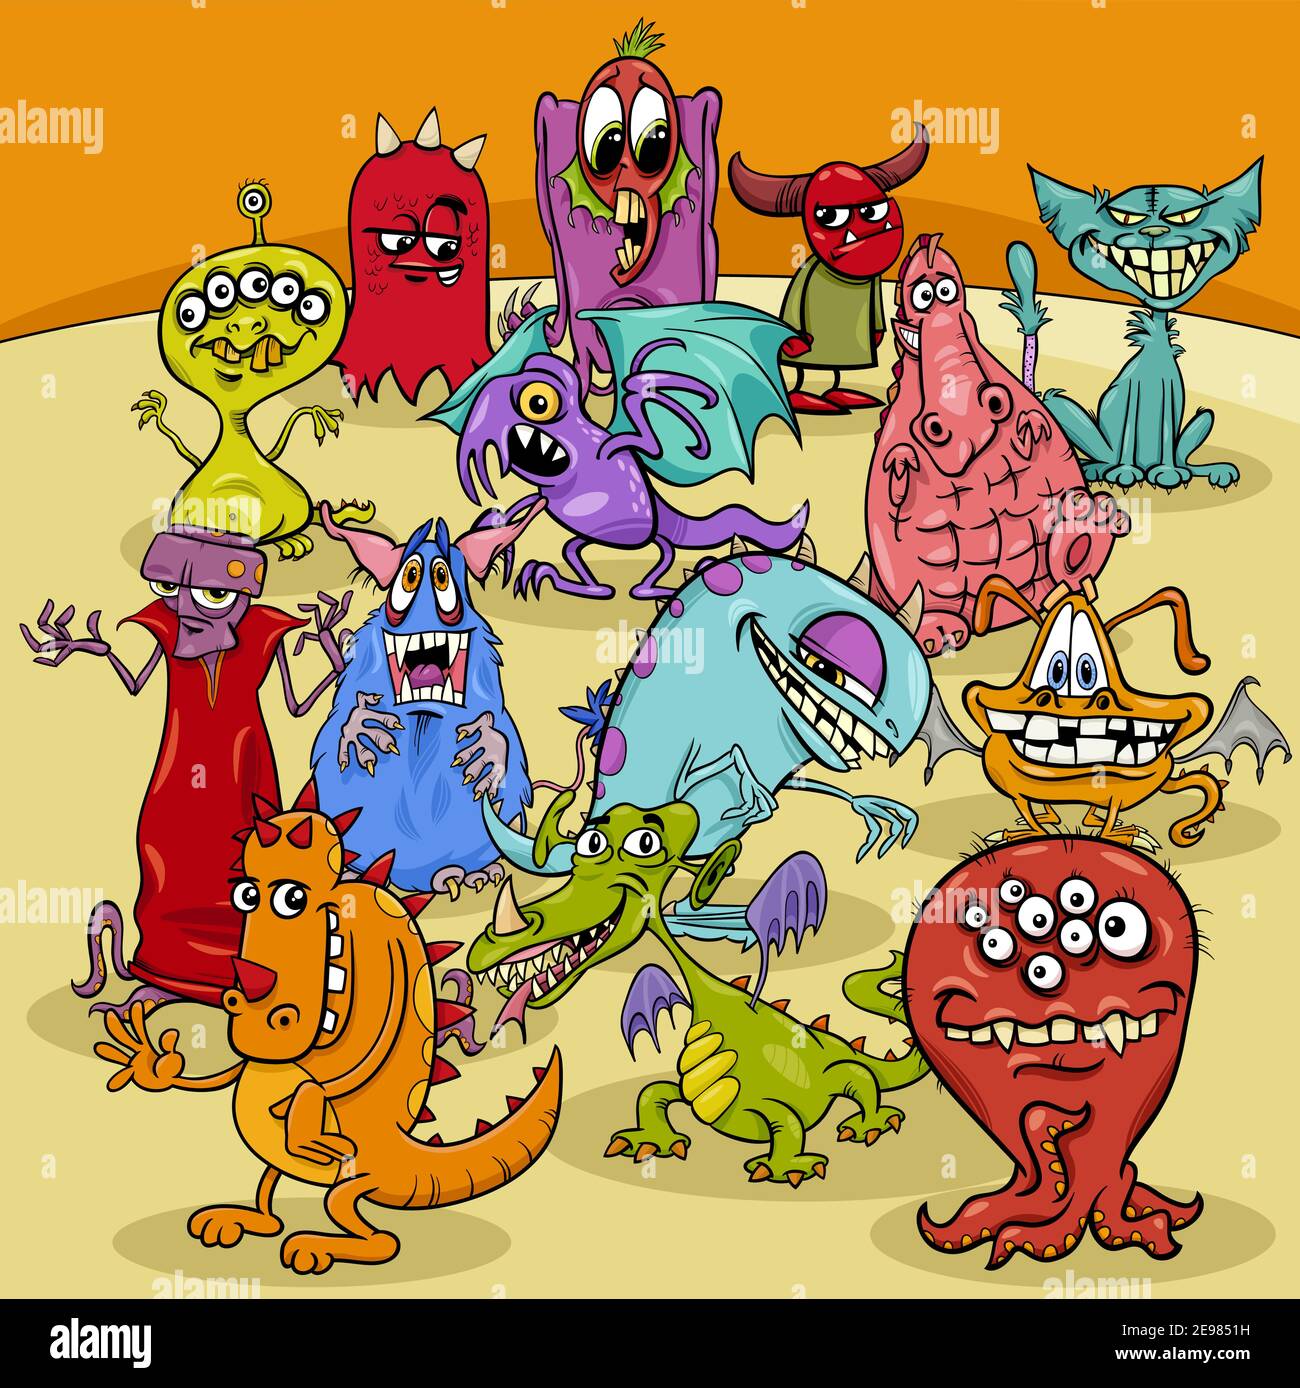 Cartoon illustration of funny monsters fantasy characters group Stock Vector